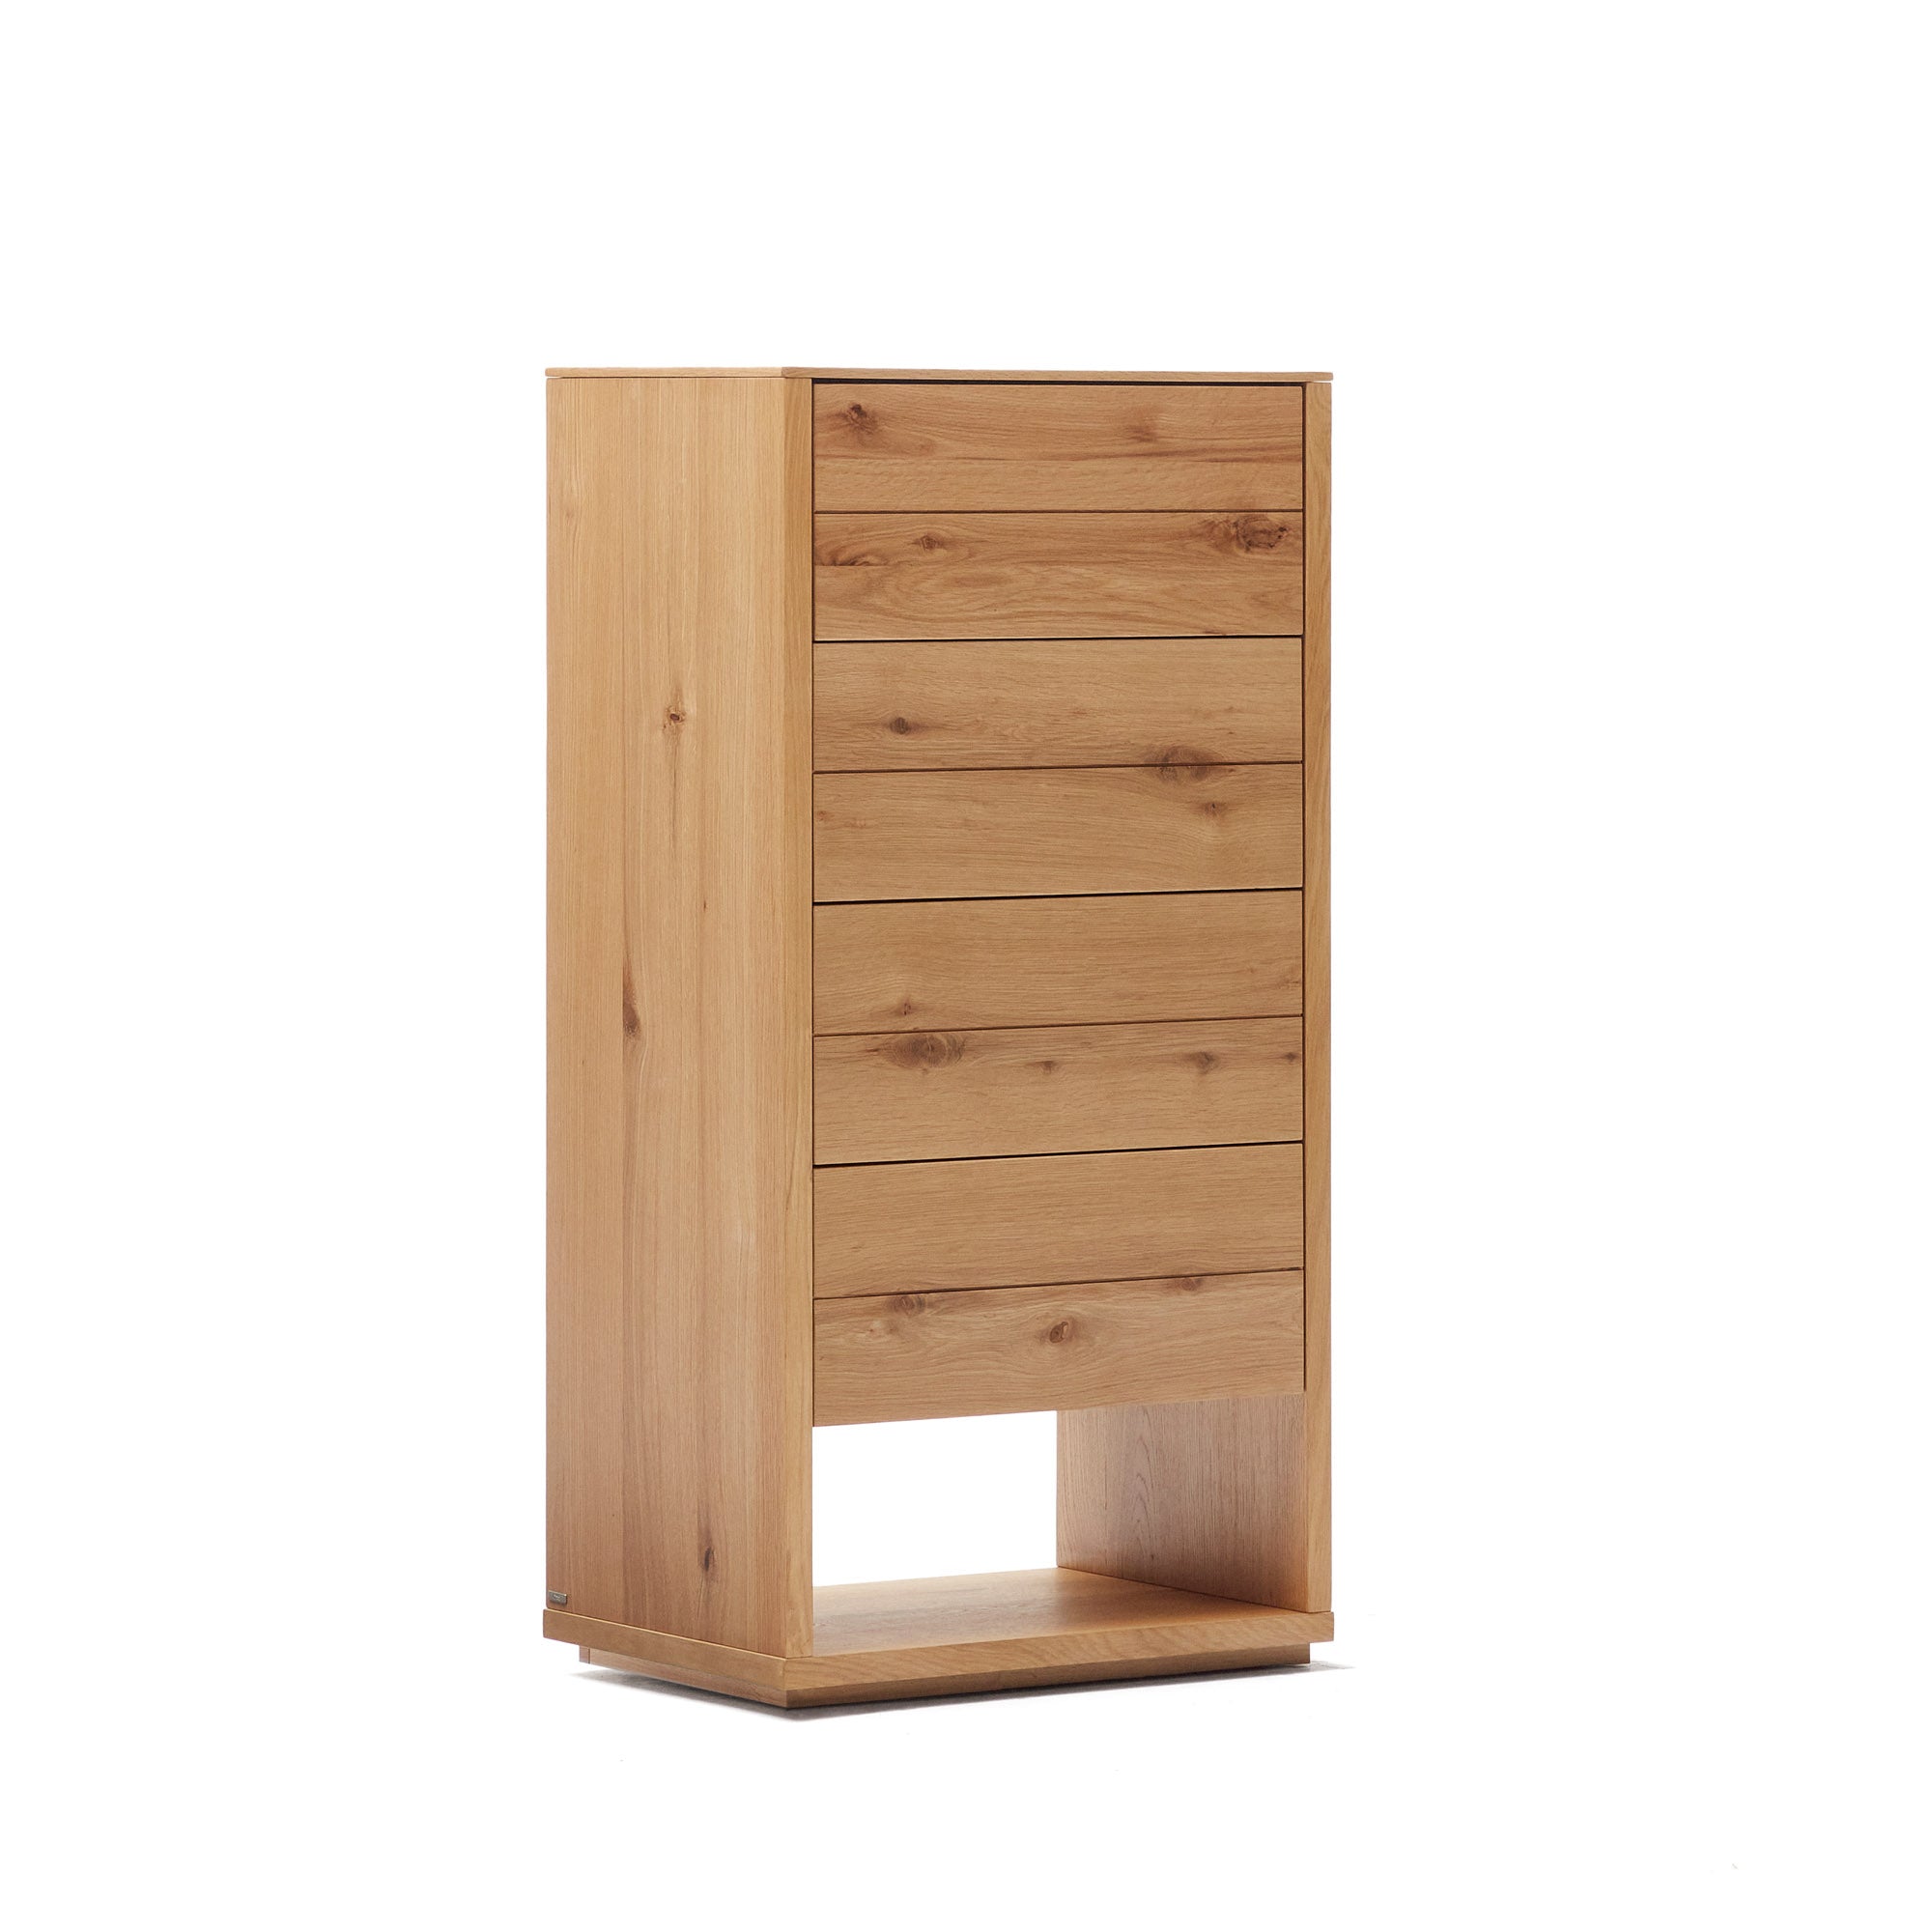 Alguema chest of drawers with 4 drawers in oak wood veneer with natural finish, 60 x 120 cm